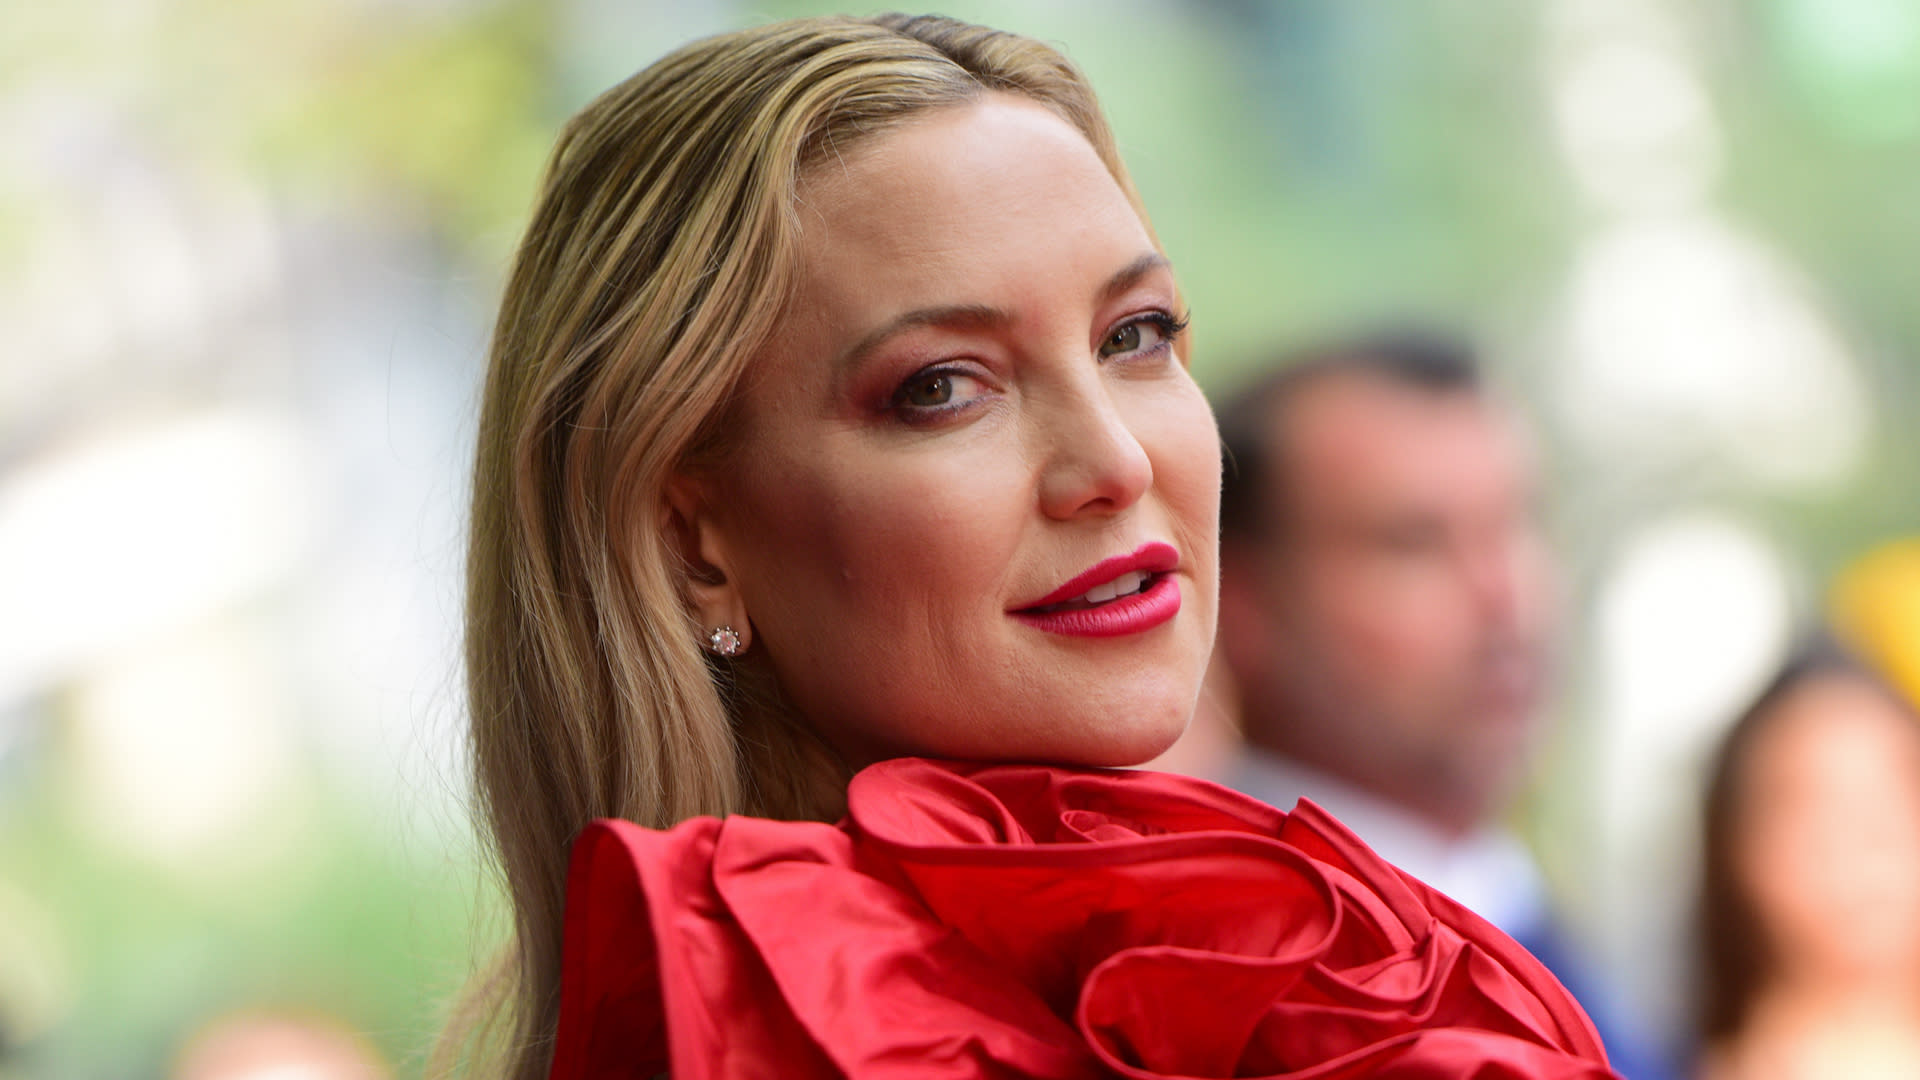 Kate Hudson Got Candid About Her Past “Failed Relationships”